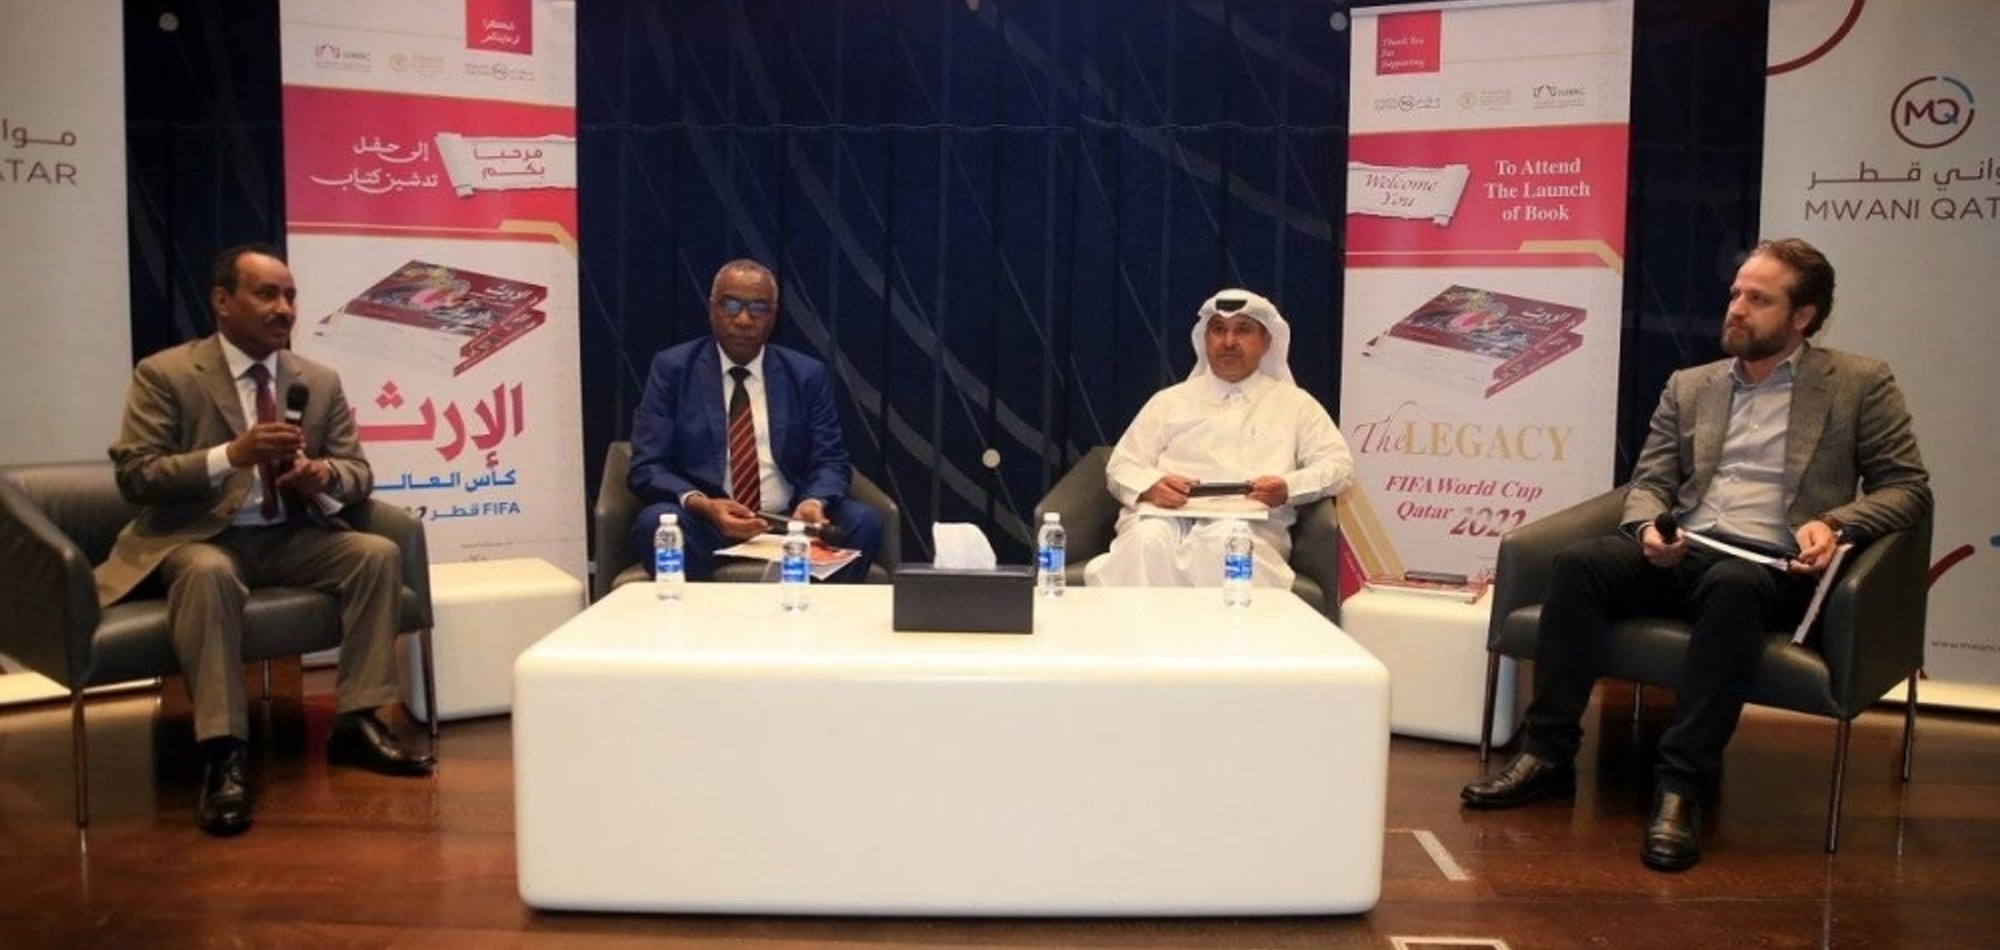 "Legacy - FIFA World Cup Qatar 2022" Book launched at QNL